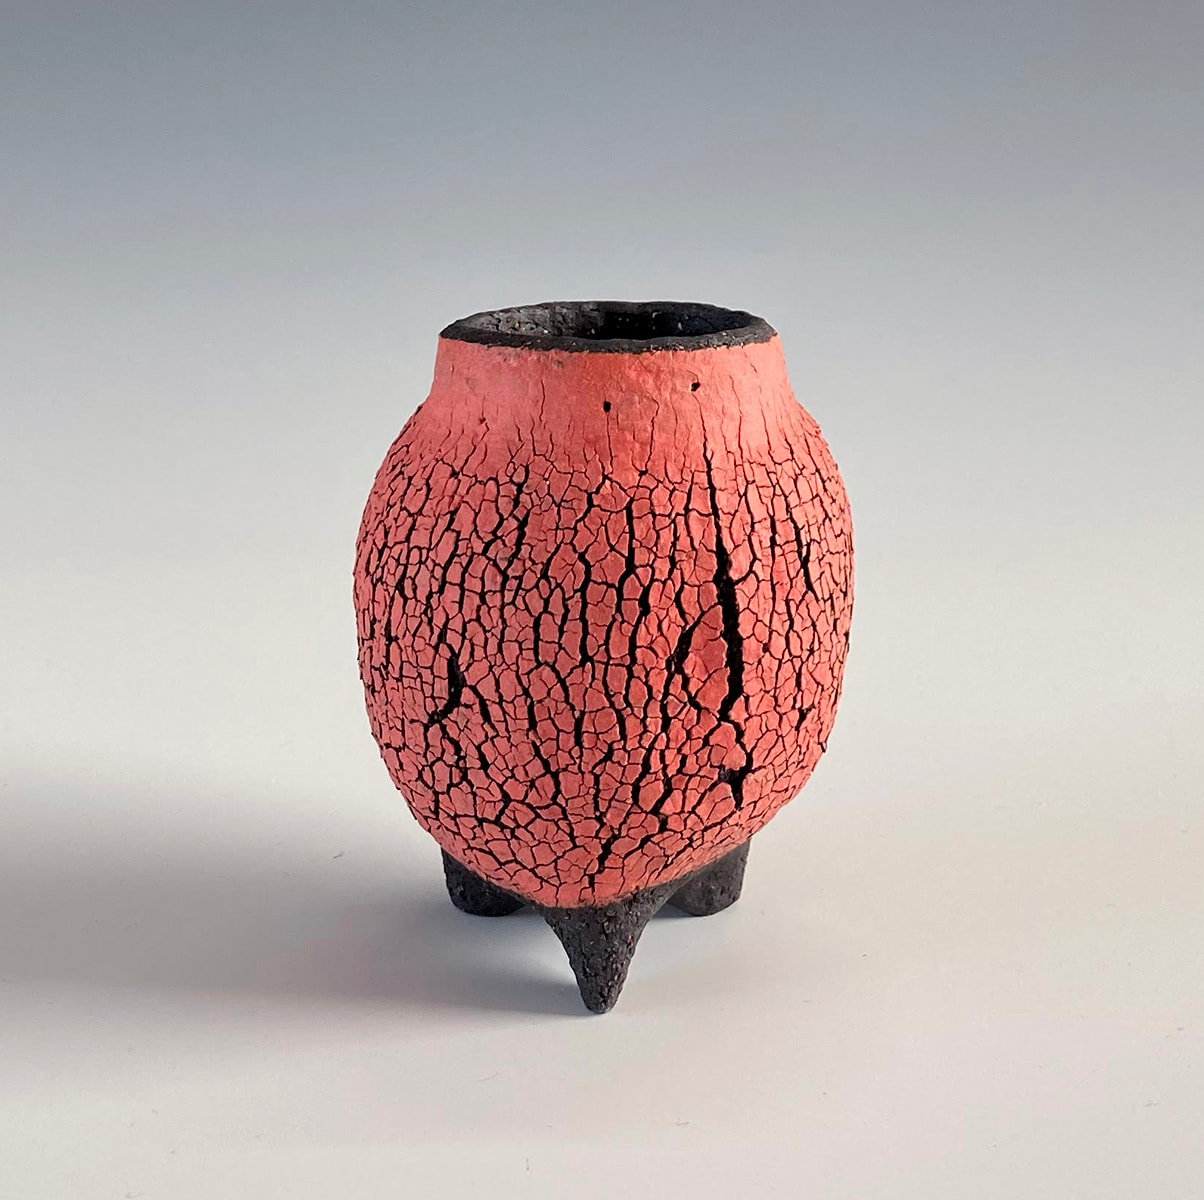 Cracked vessel – red